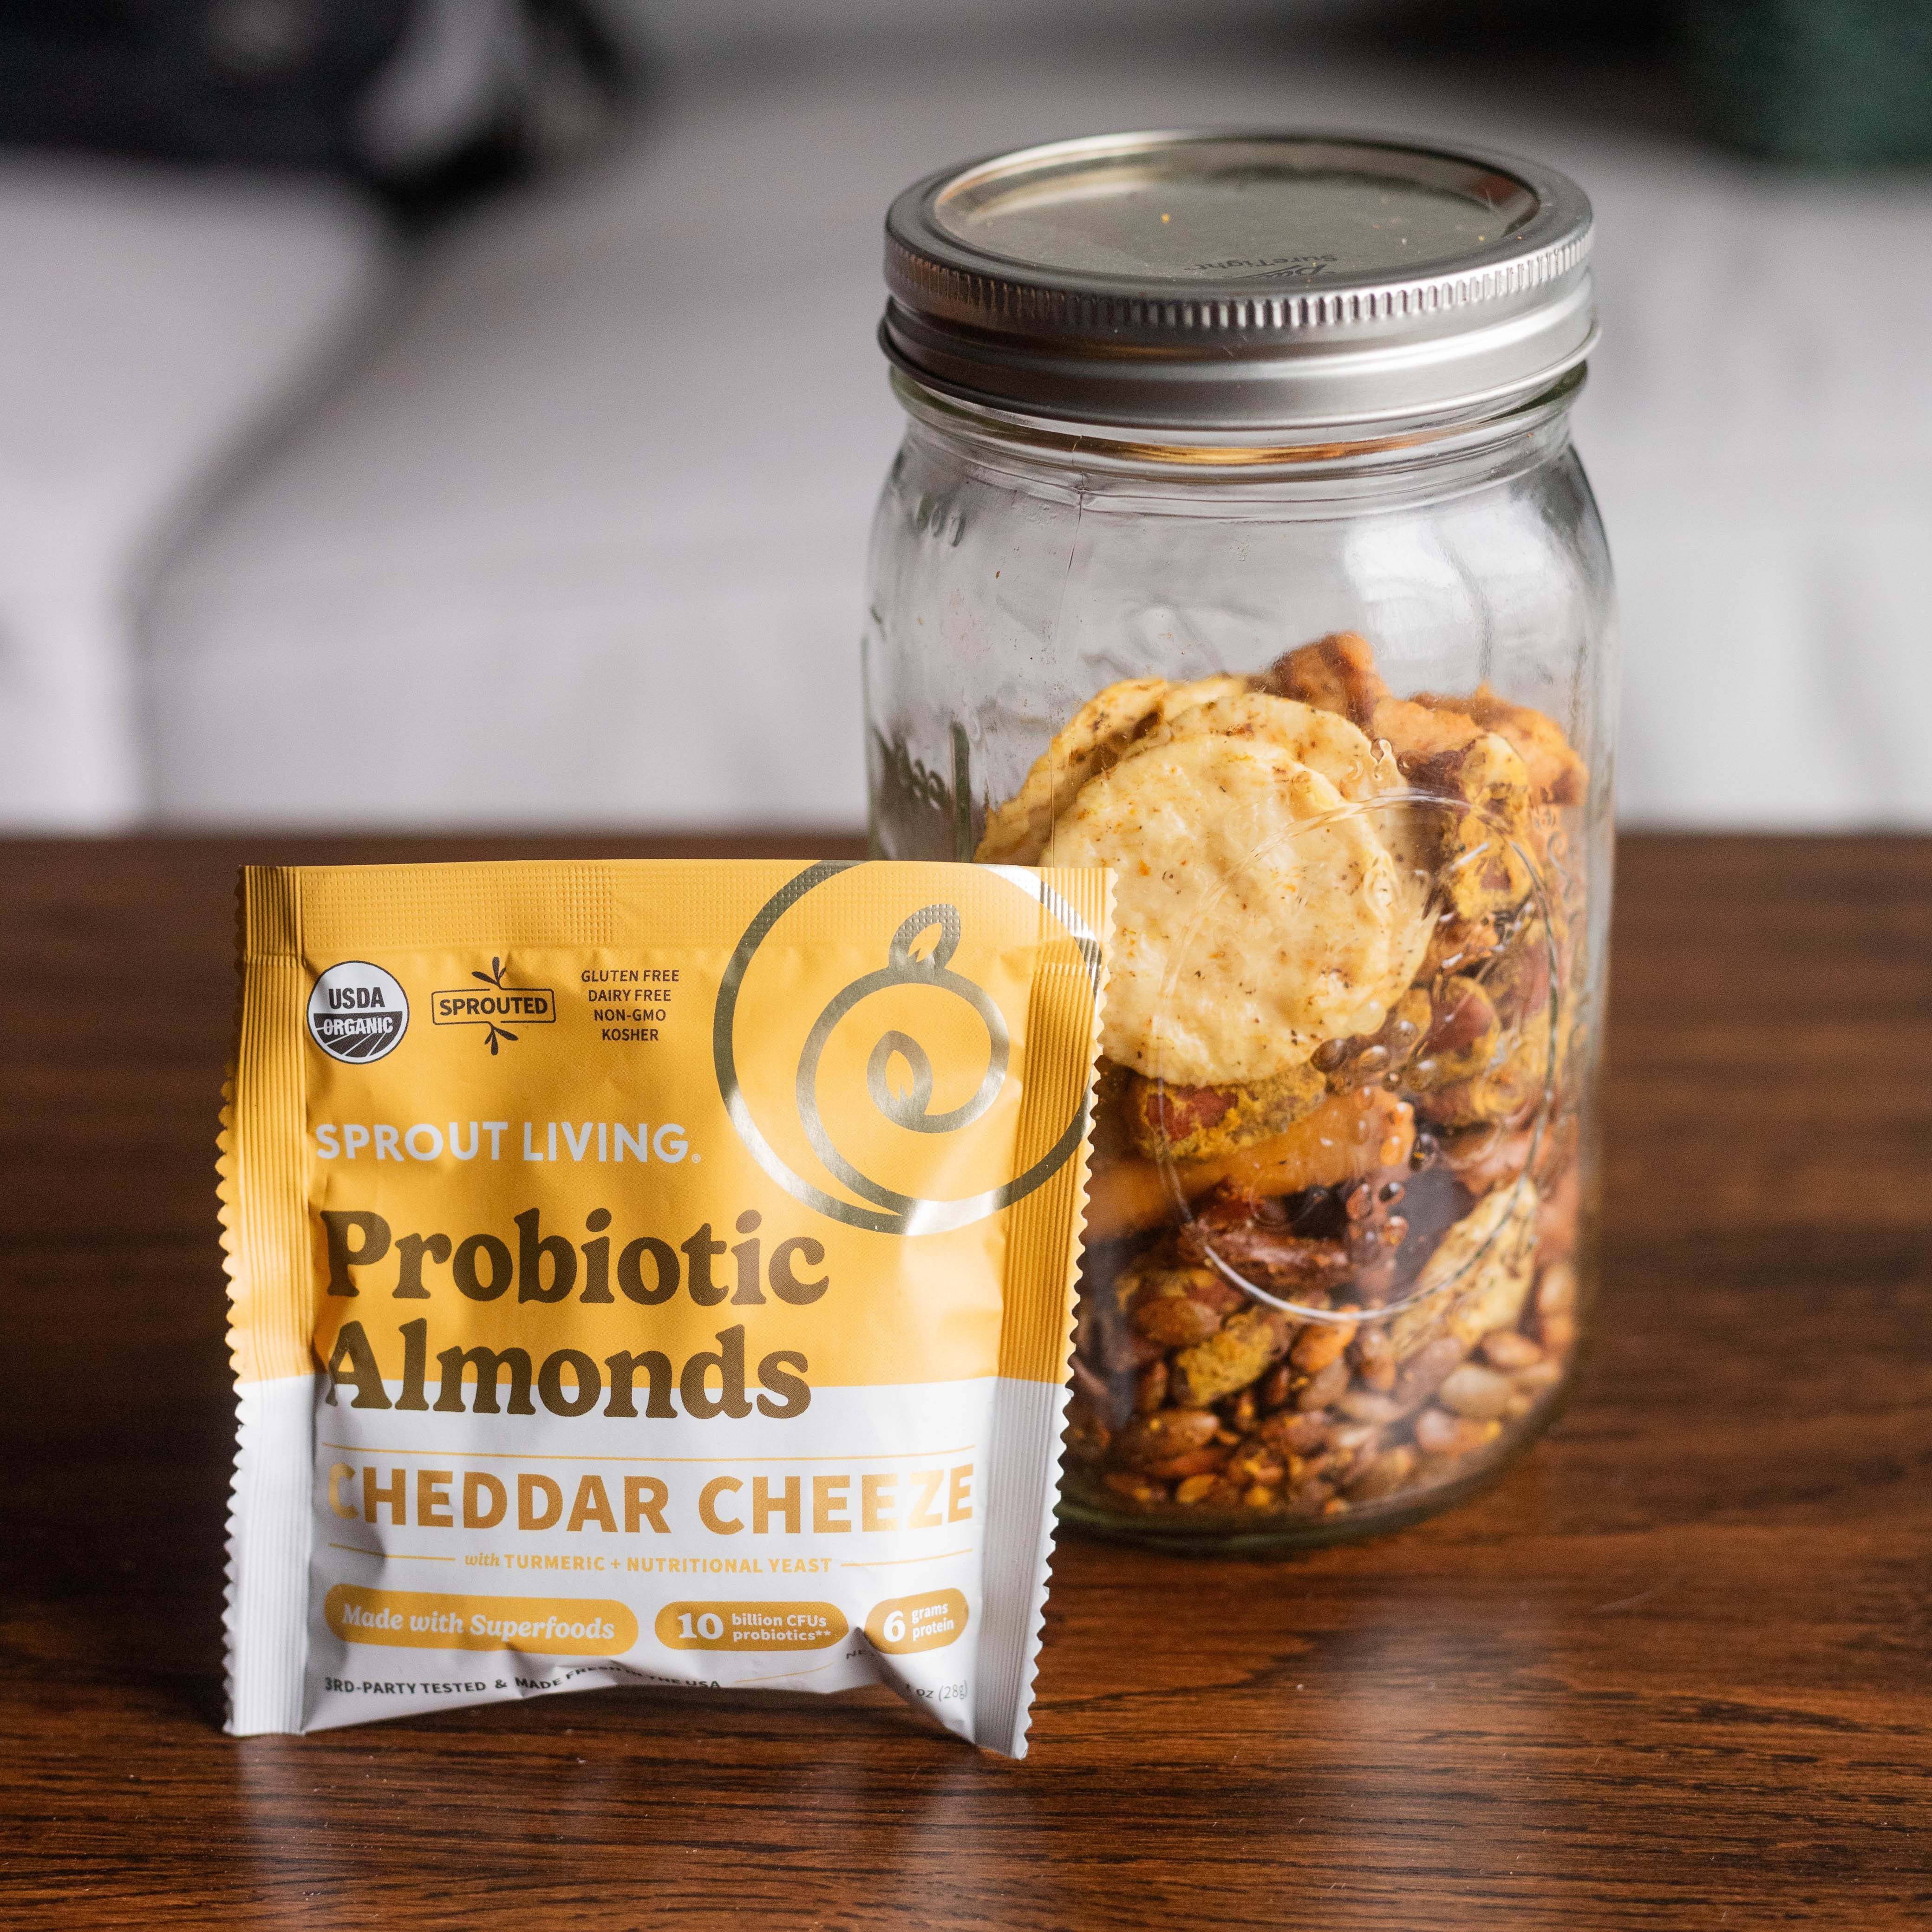 CHeddar Cheeze Probiotic Almonds and Snack Mix